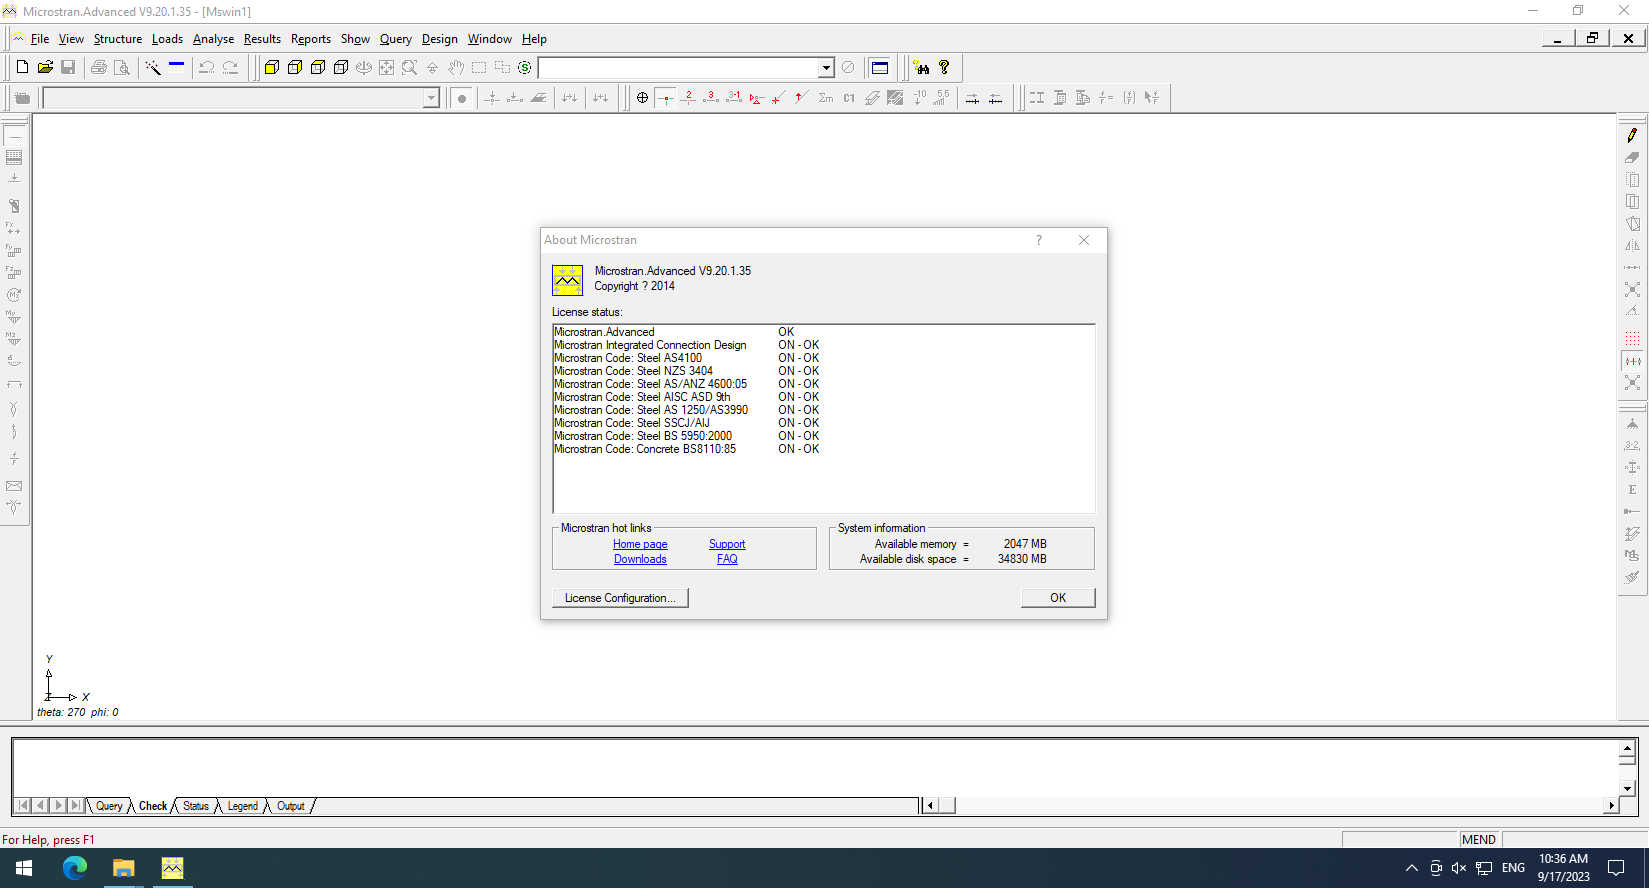 Working with Bentley Microstran Advanced 09.20.01.35 full license